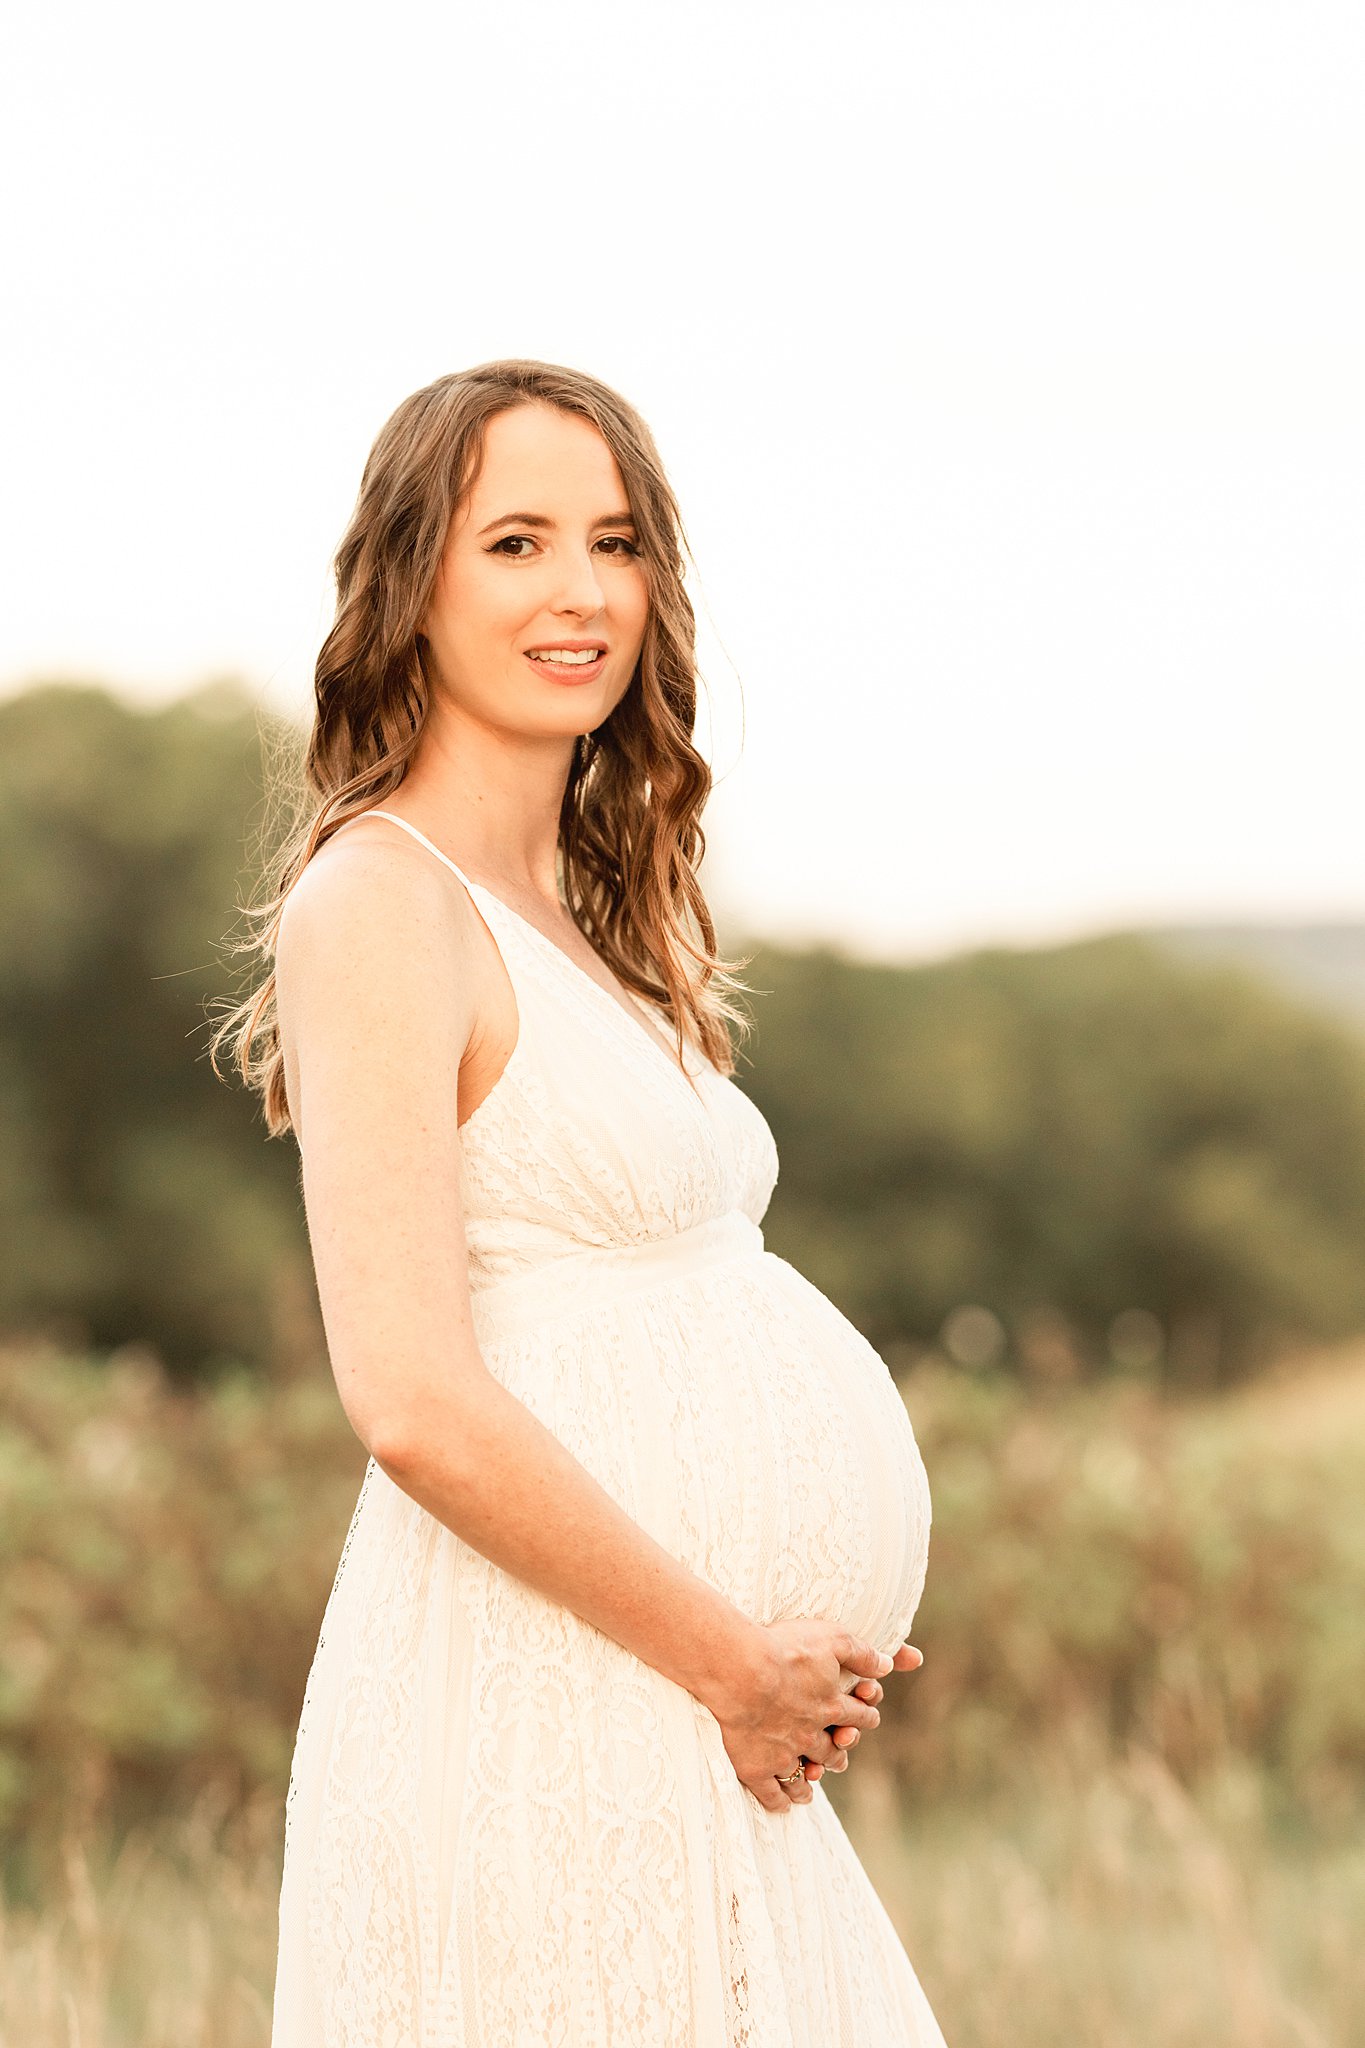 A mom to be in a white lace dress stands in a field of grass holding her bump after getting a pittsburgh 3d ultrasound